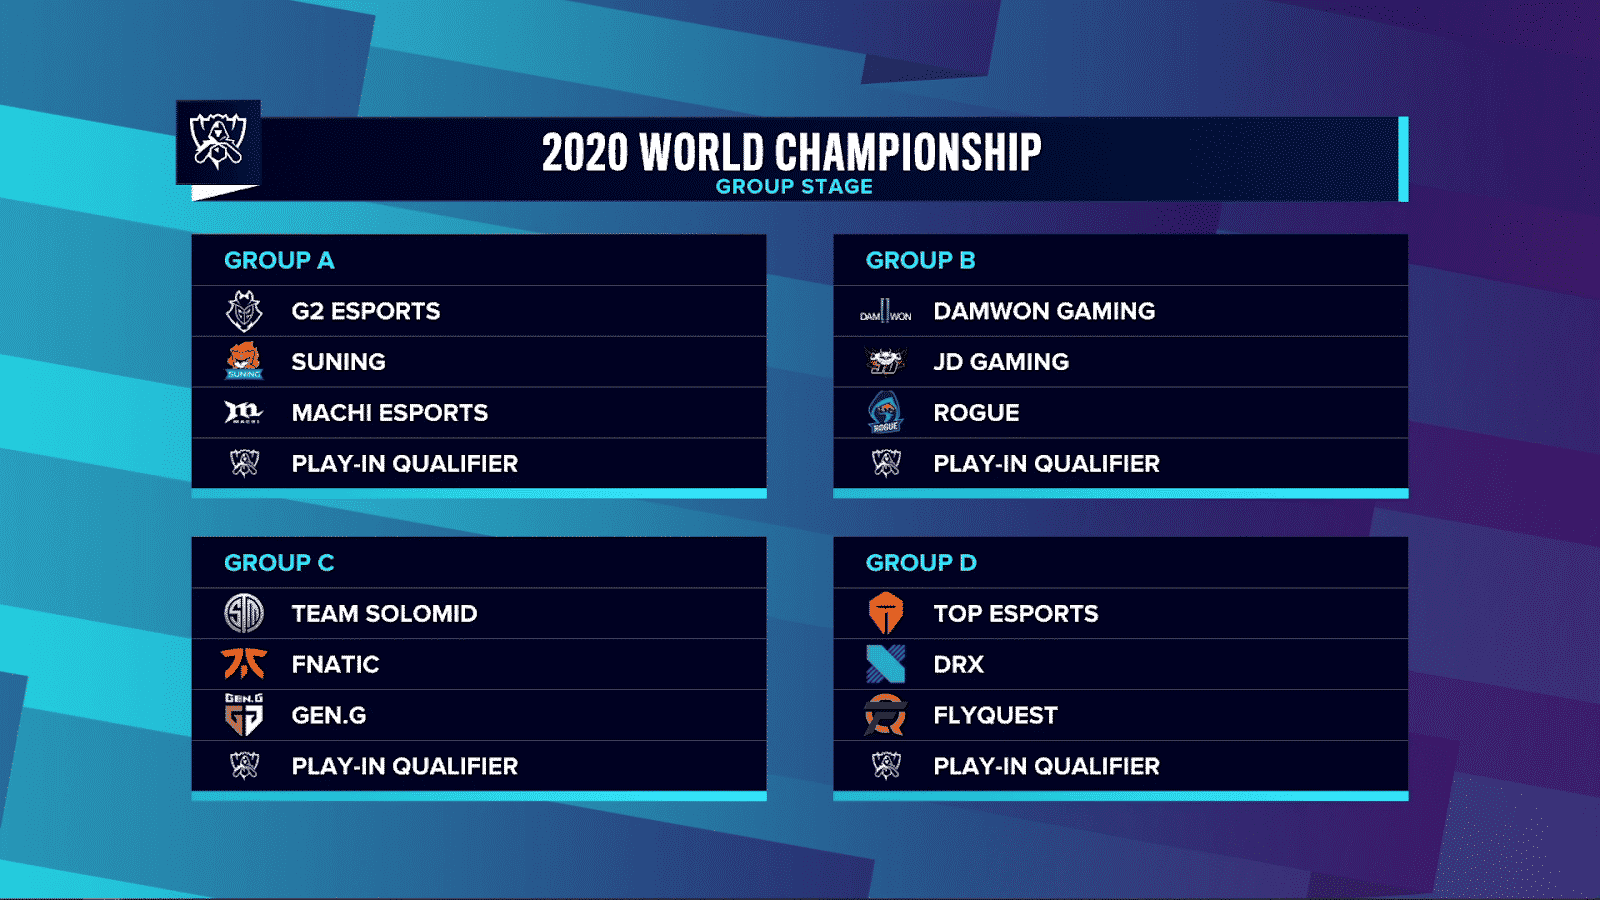 The draw for the Group Stage of the 2020 LoL World Championship